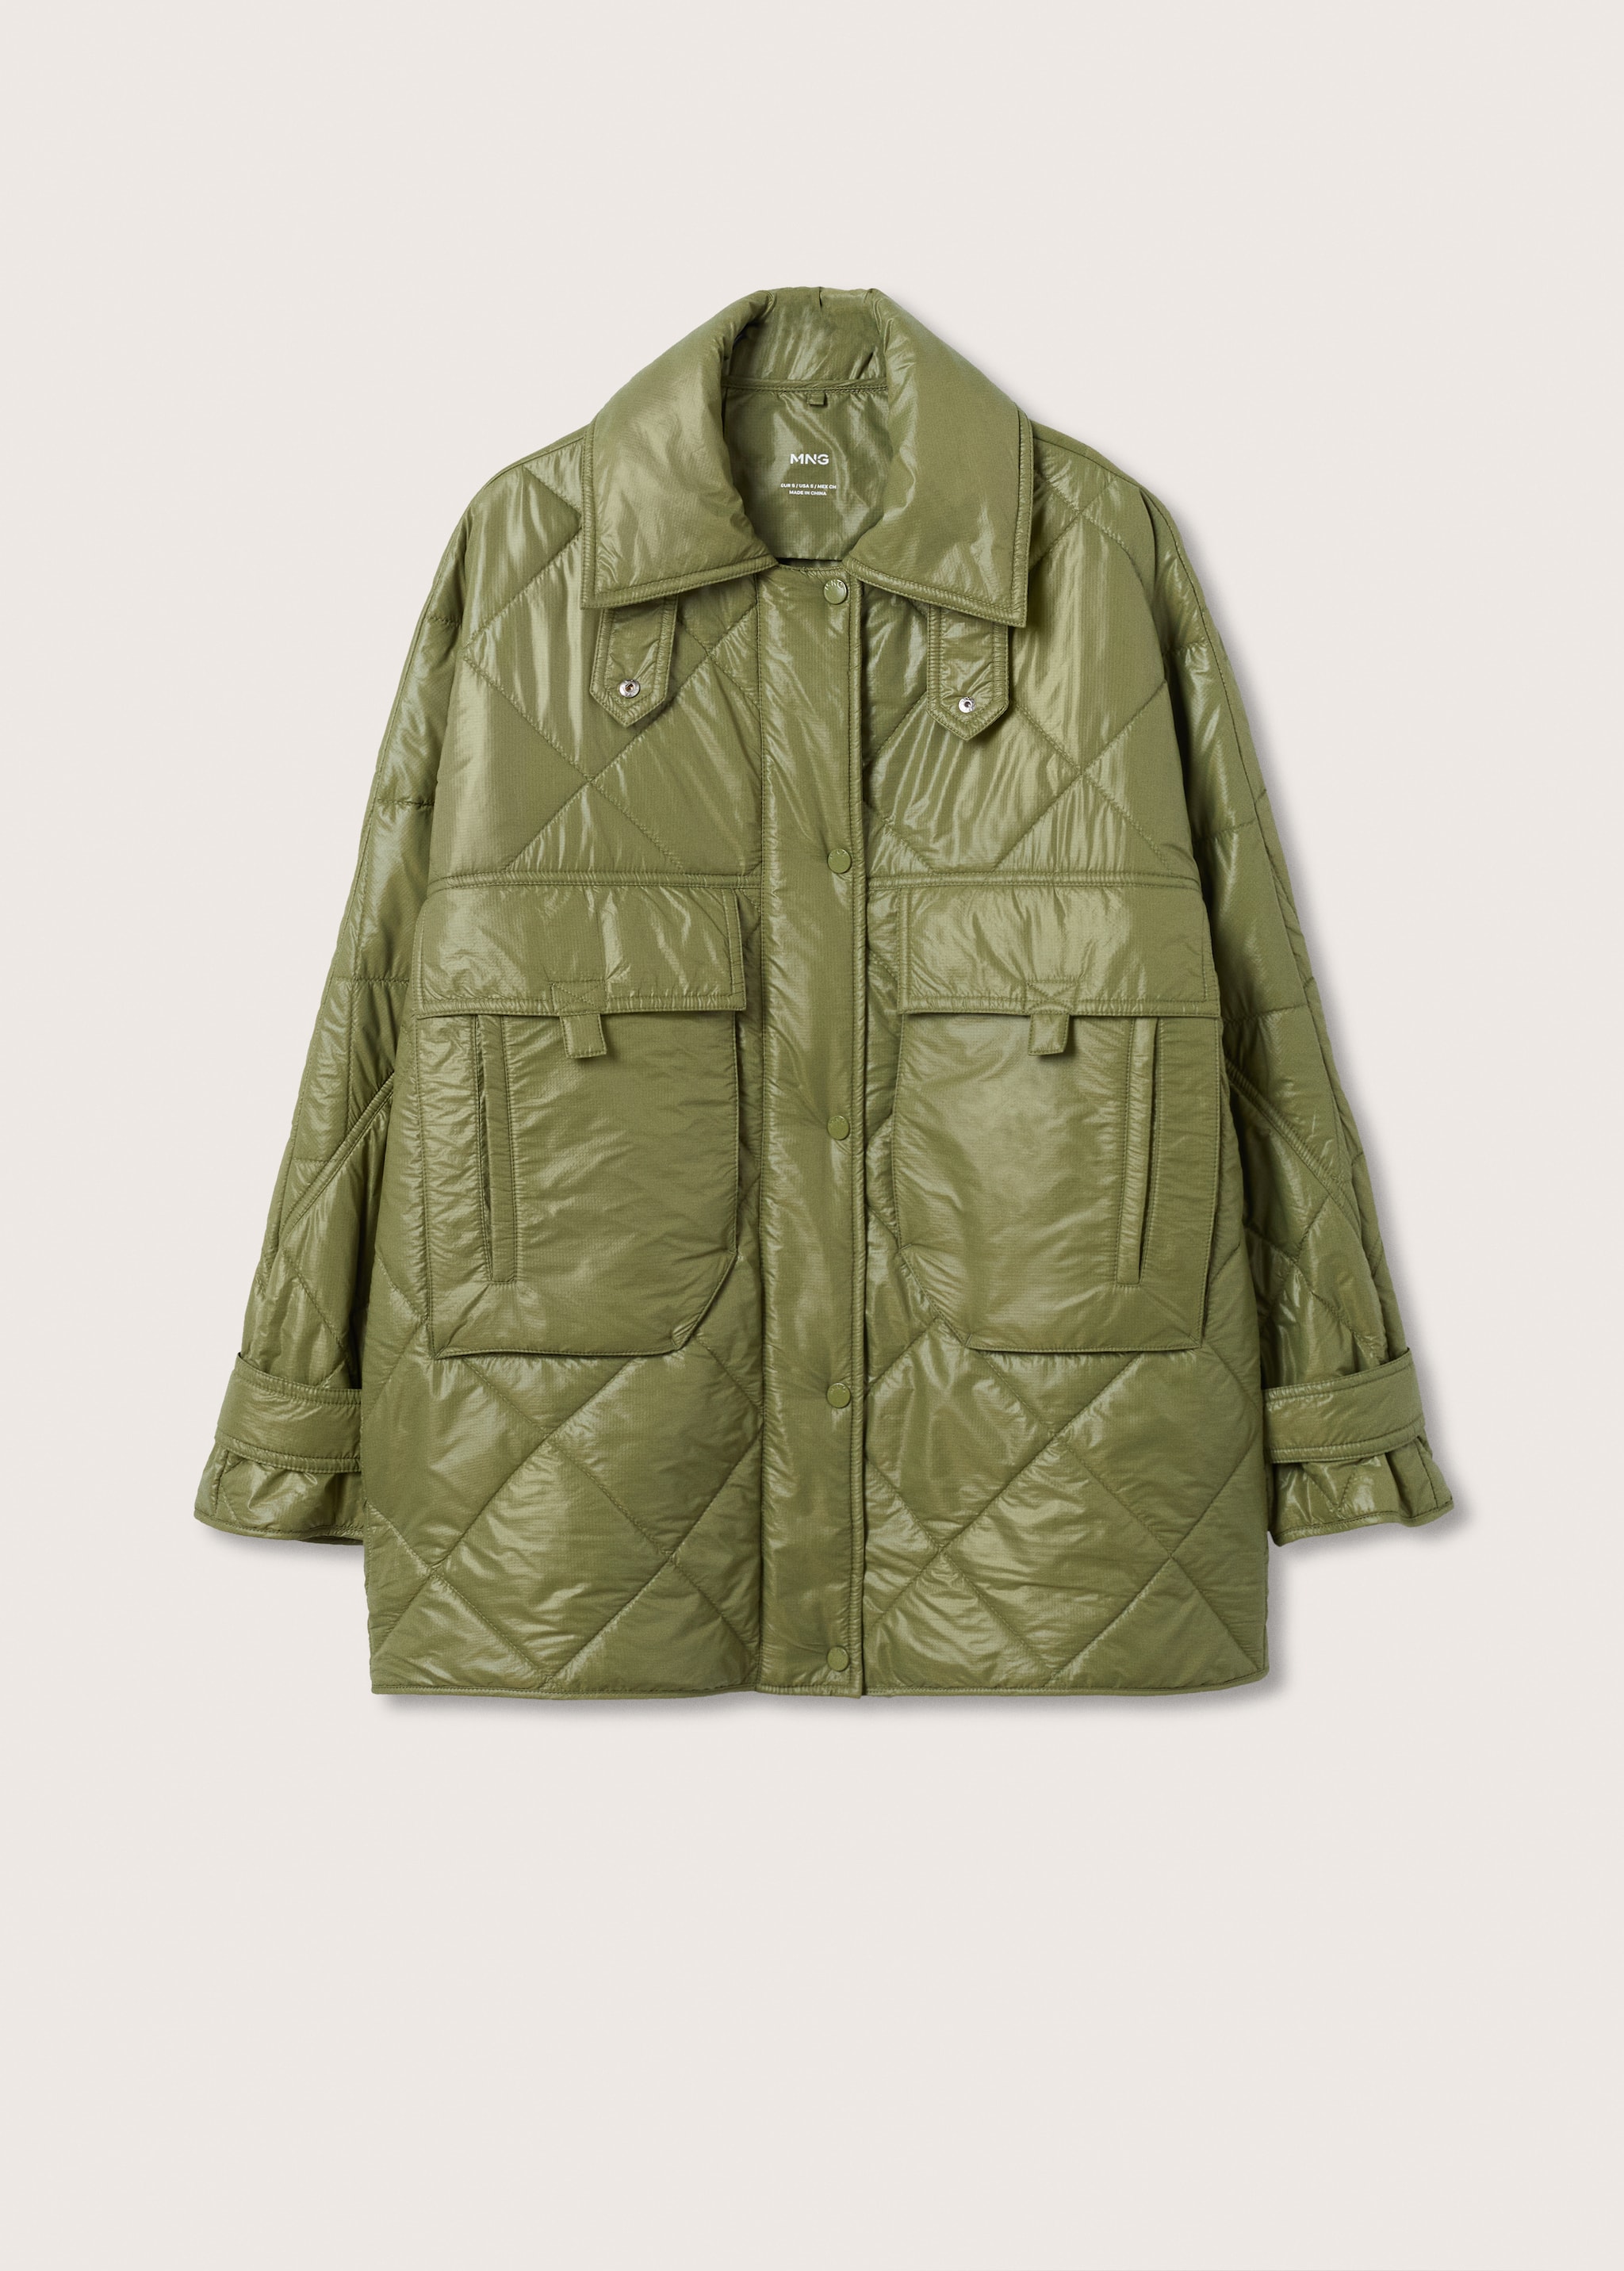 Ultralight quilted jacket - Article without model